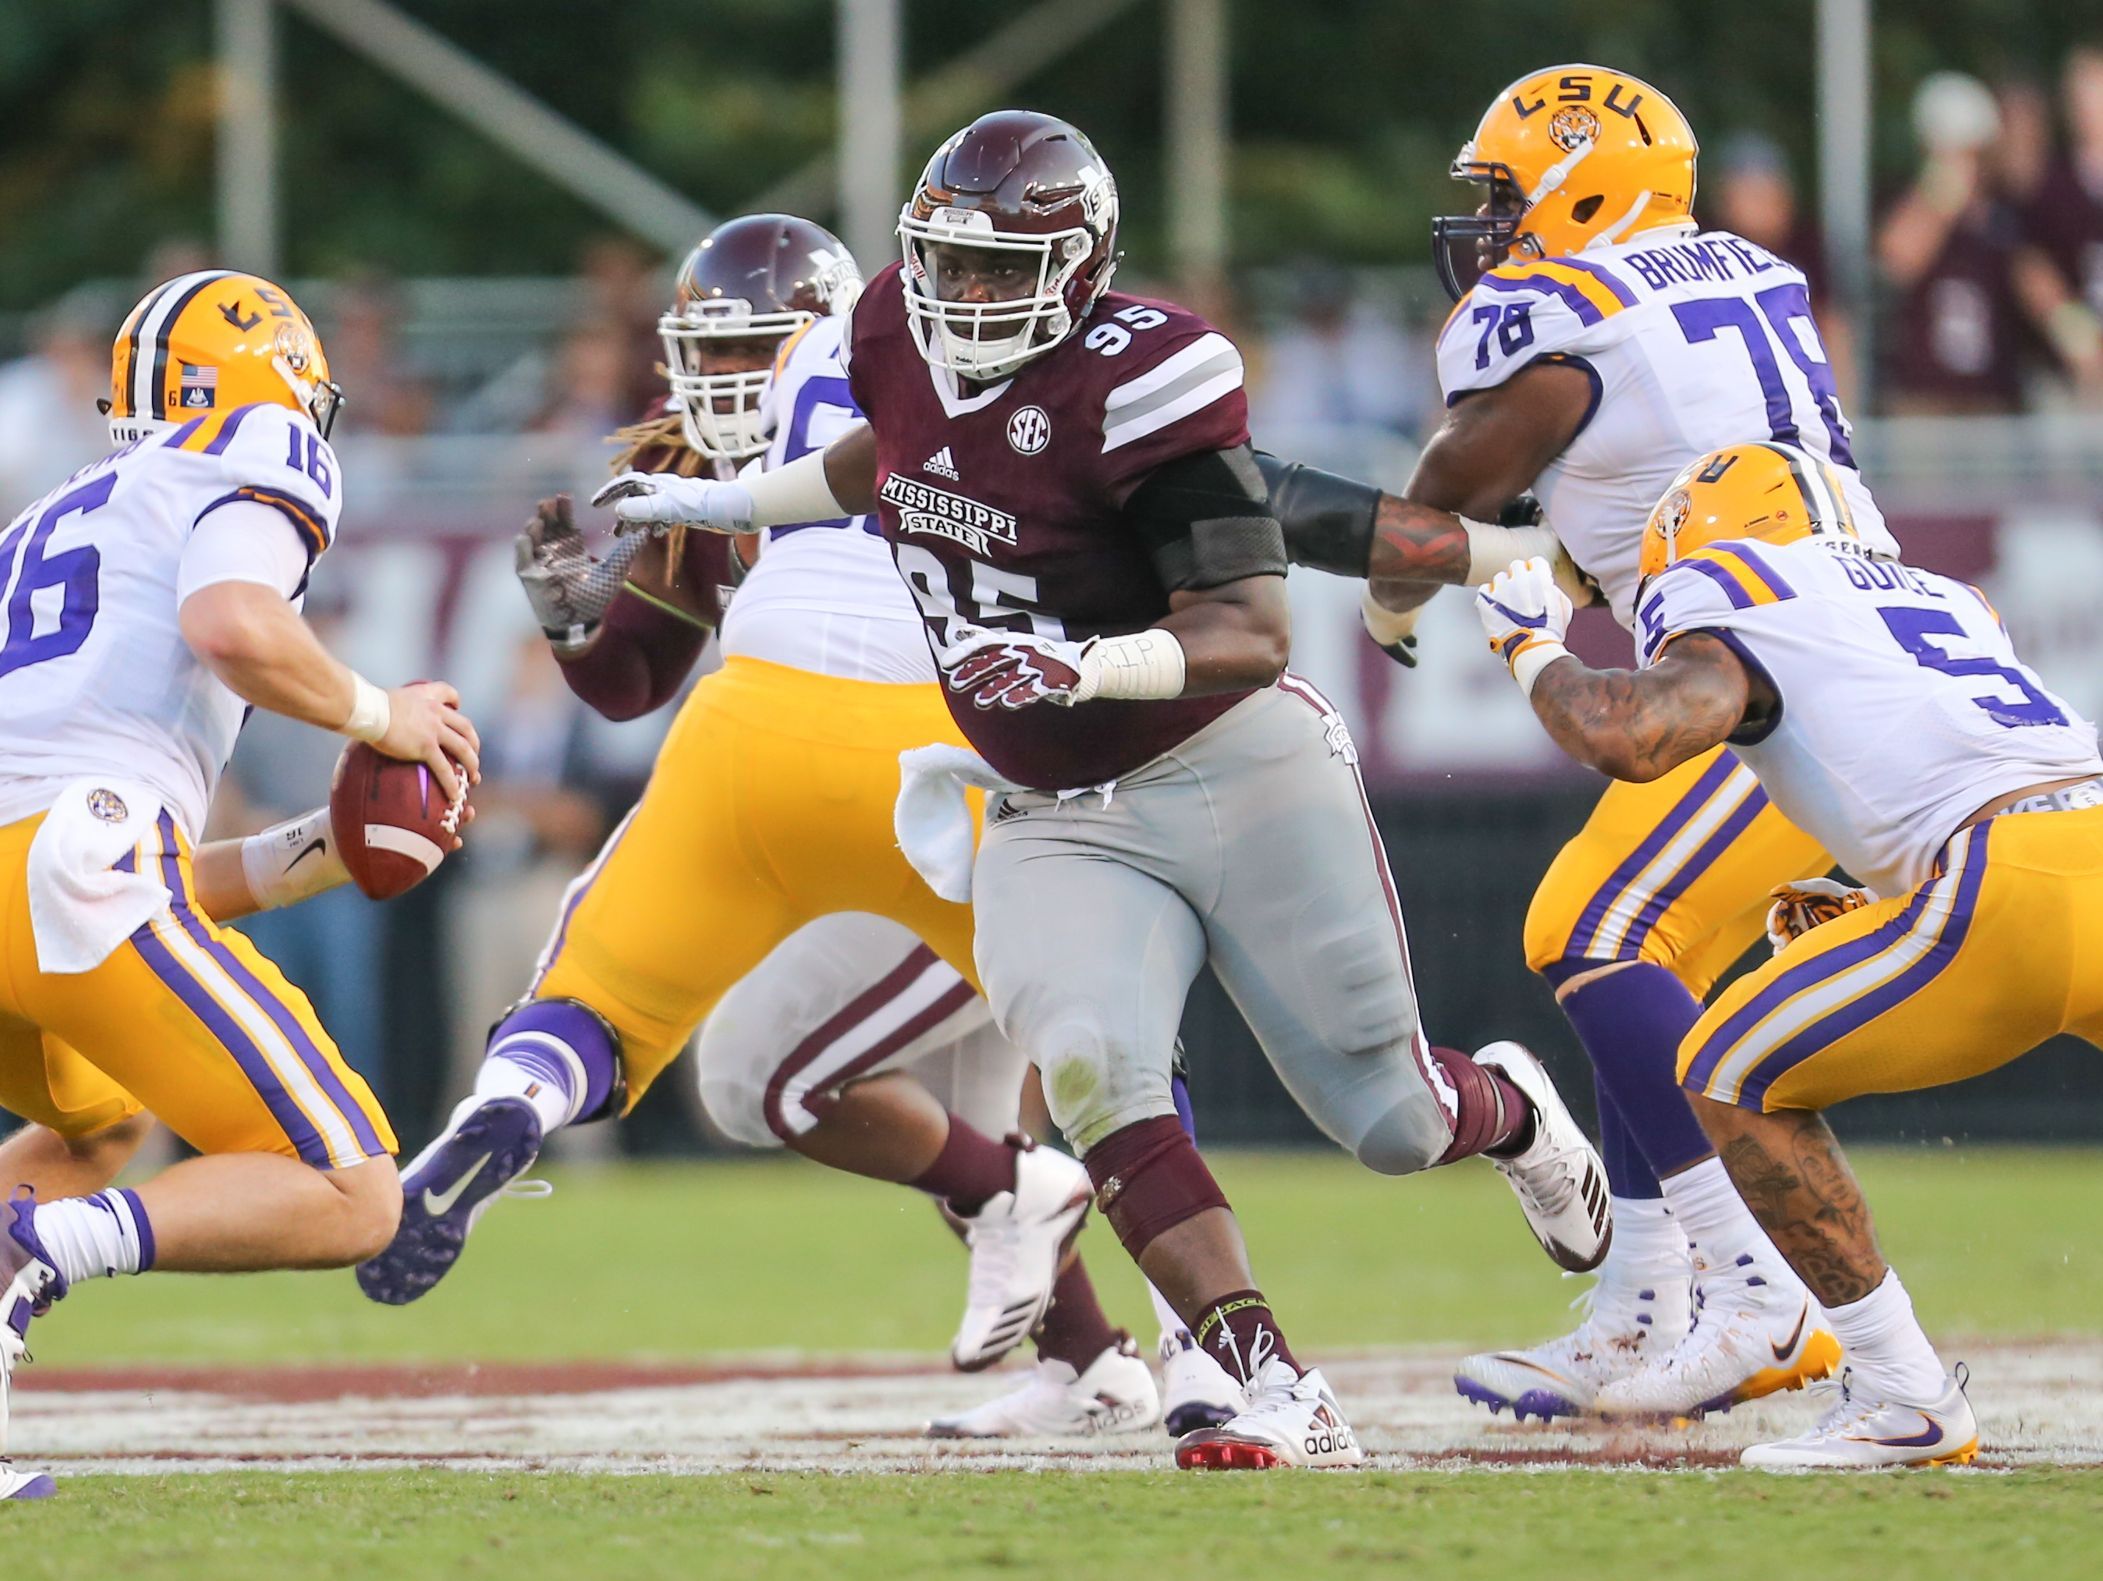 Mississippi State’s defensive front and offensive line may give it edge